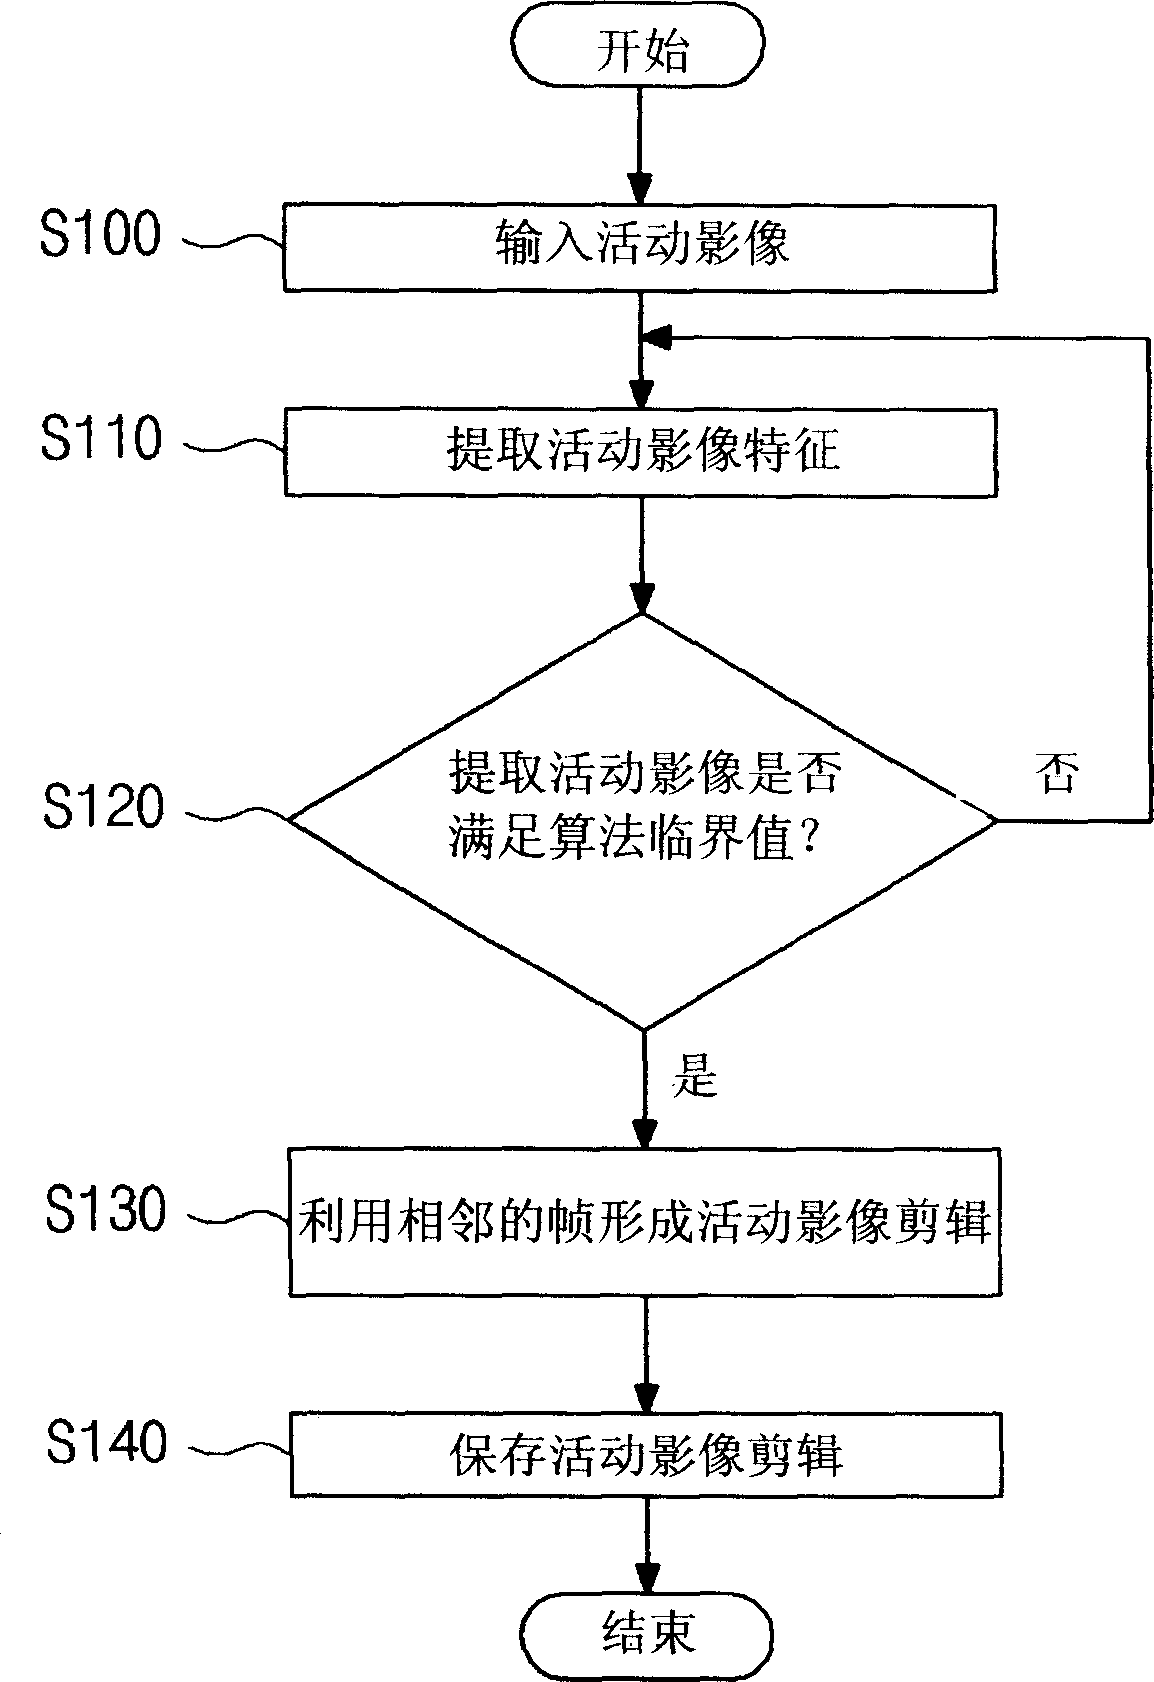 Mobile communication terminal capable of briefly offering activity video and its abstract offering method